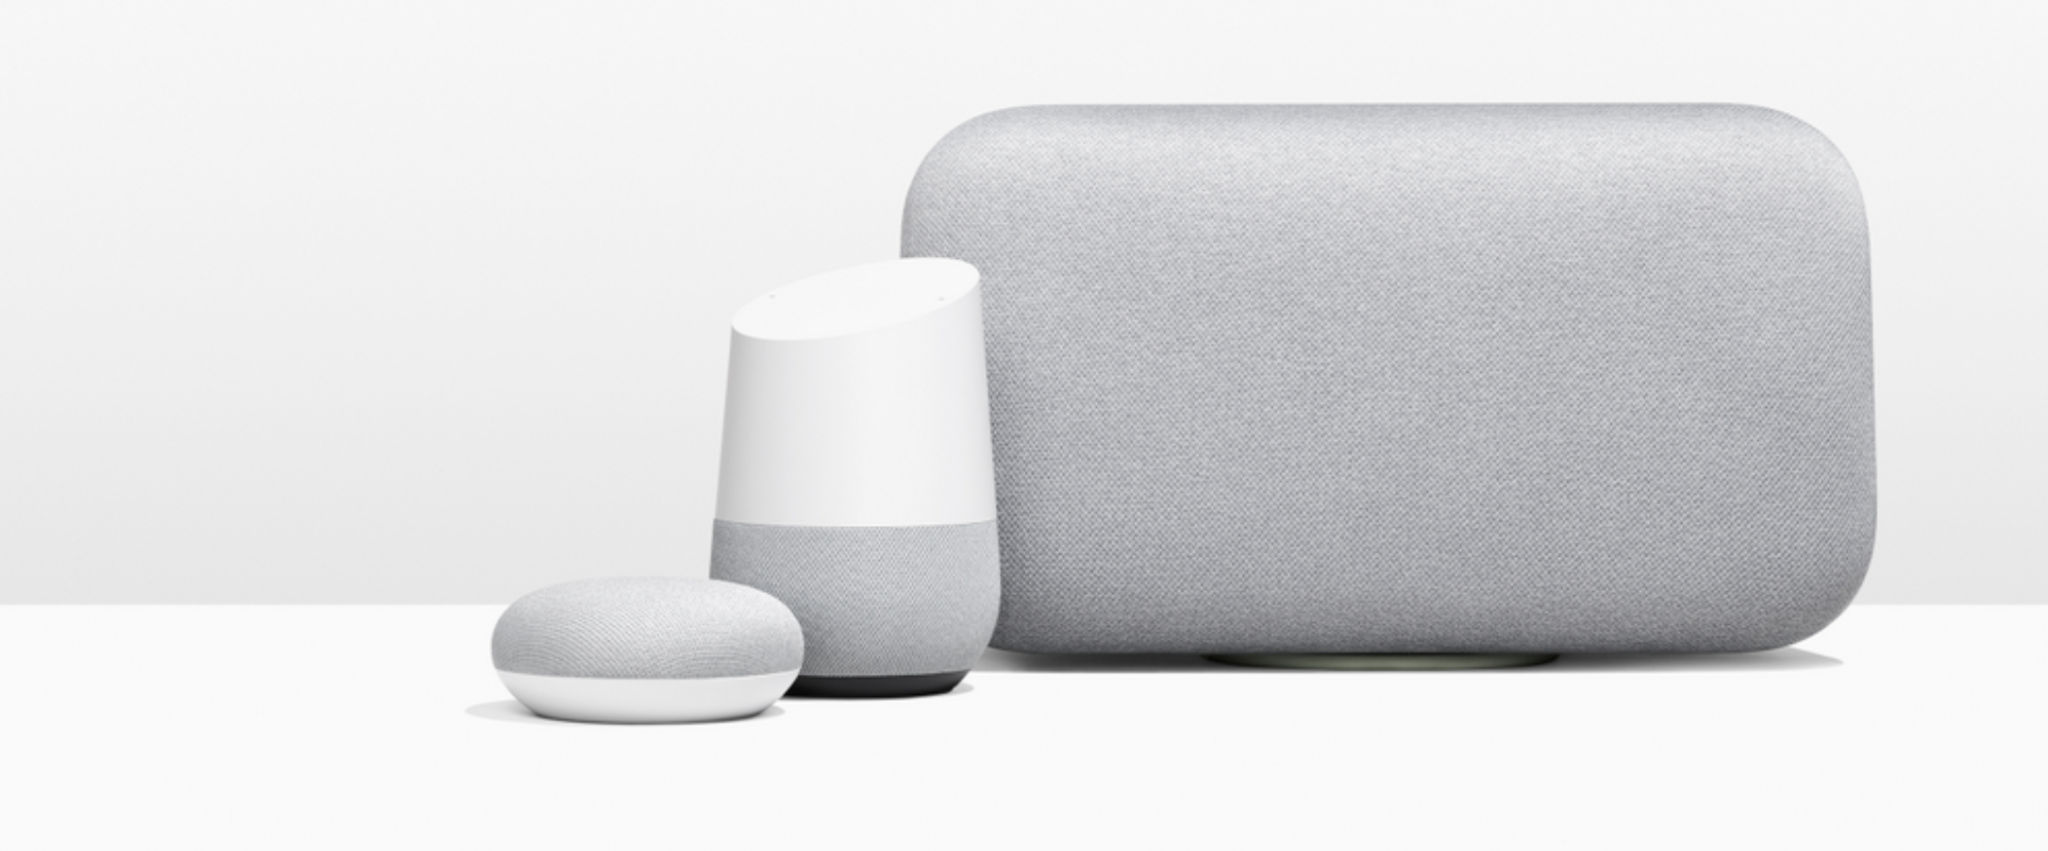 Judge Throws Out Sonos’s $32.5 Verdict in Big Win For Google Over Audio Sharing Tech